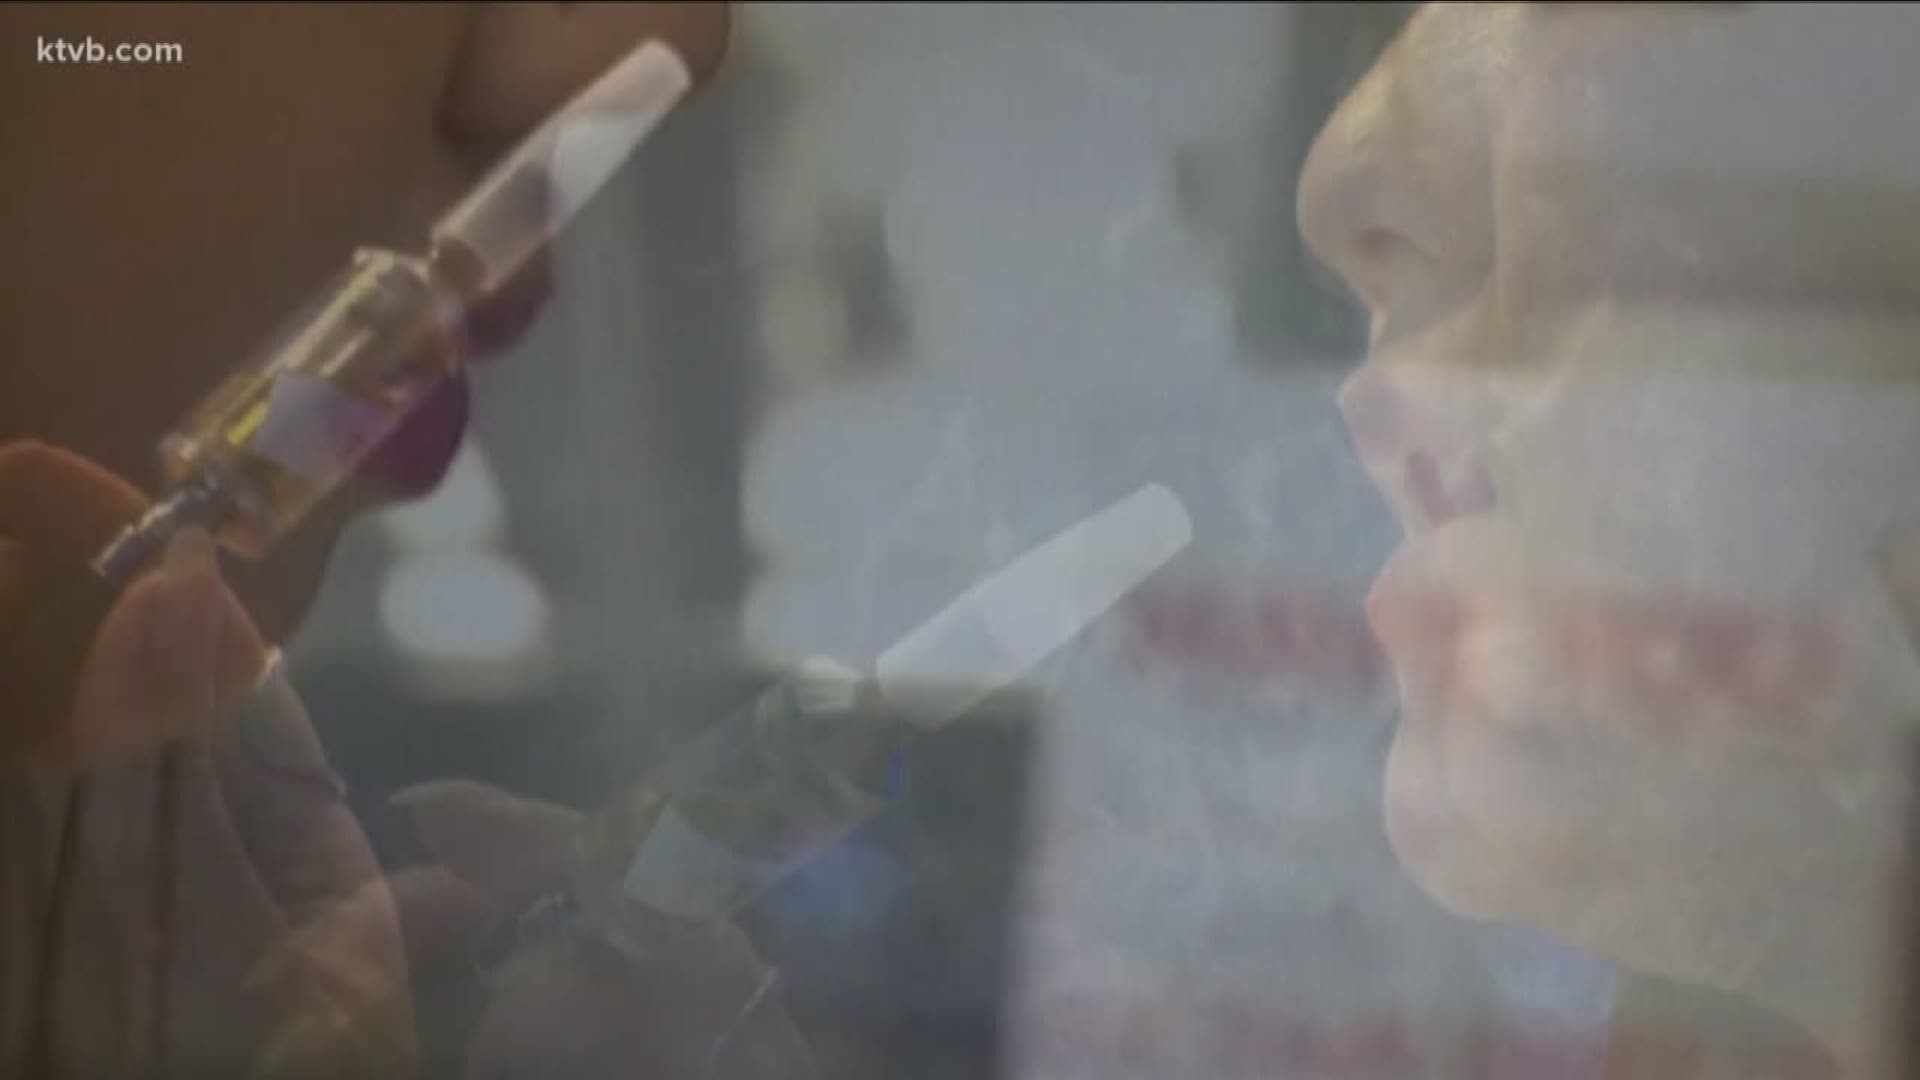 Health officials say 10 people have been hospitalized in Idaho with vaping-related illnesses.